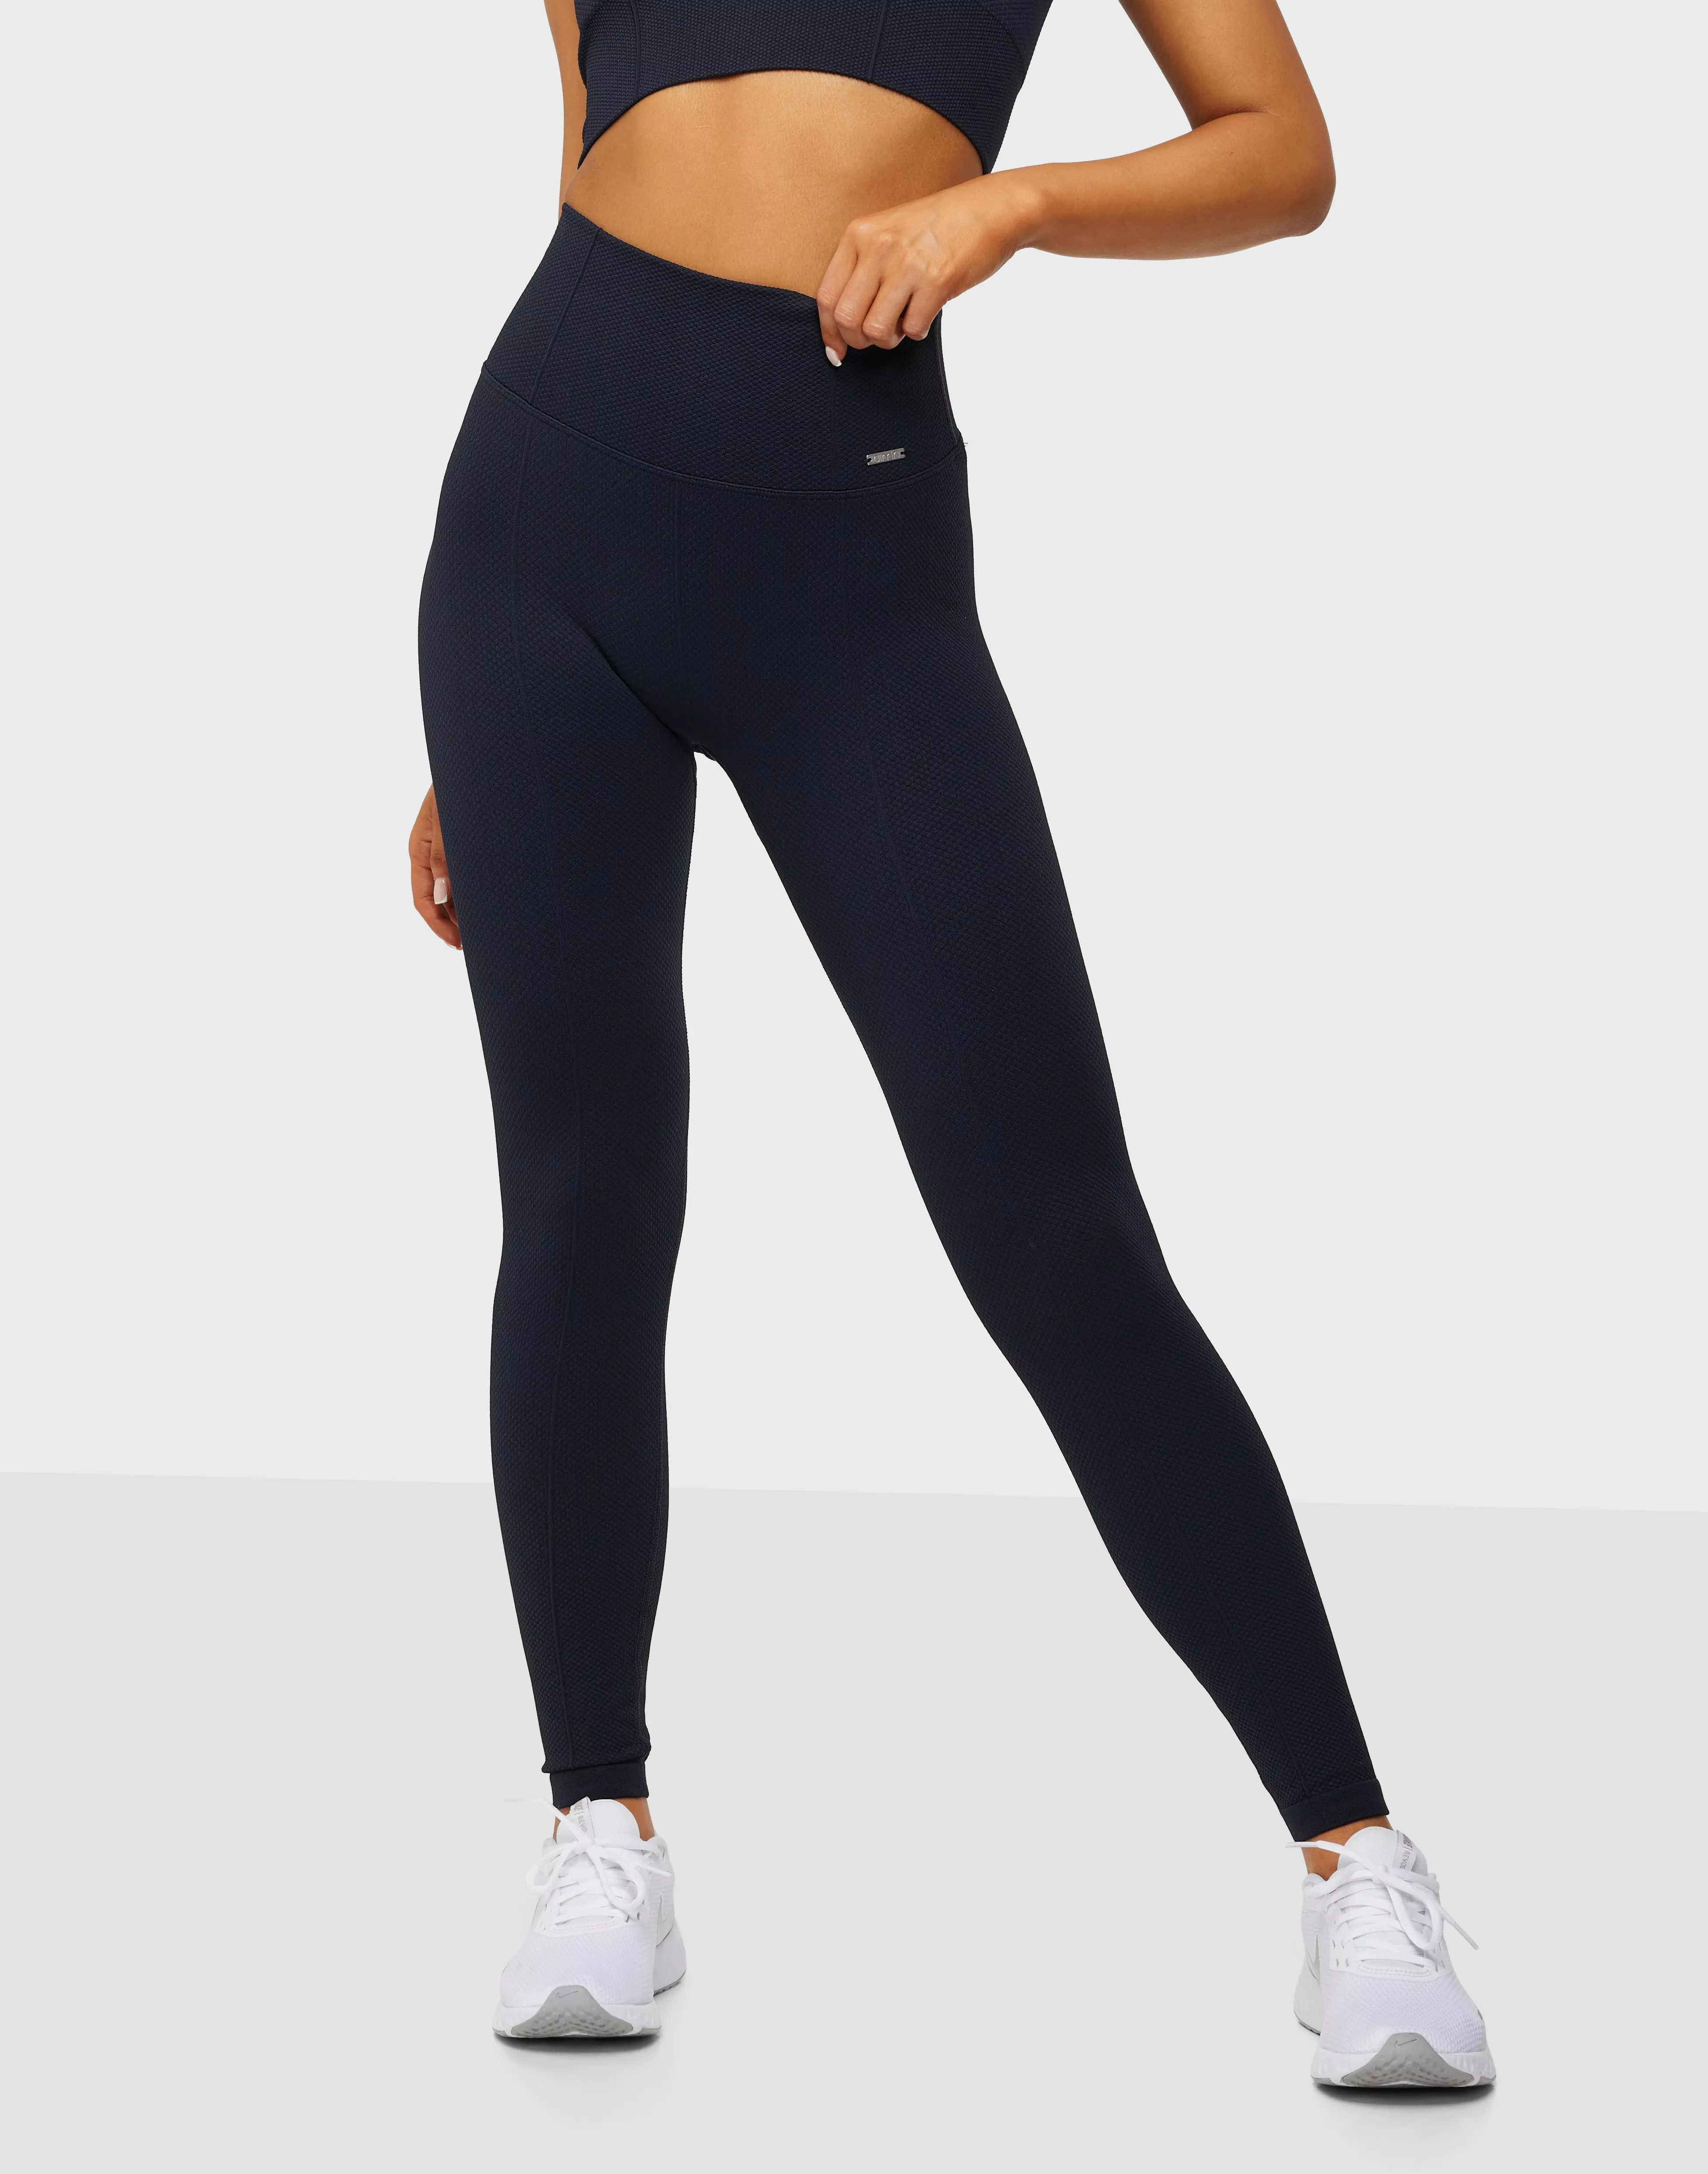 Luxe Seamless Tights